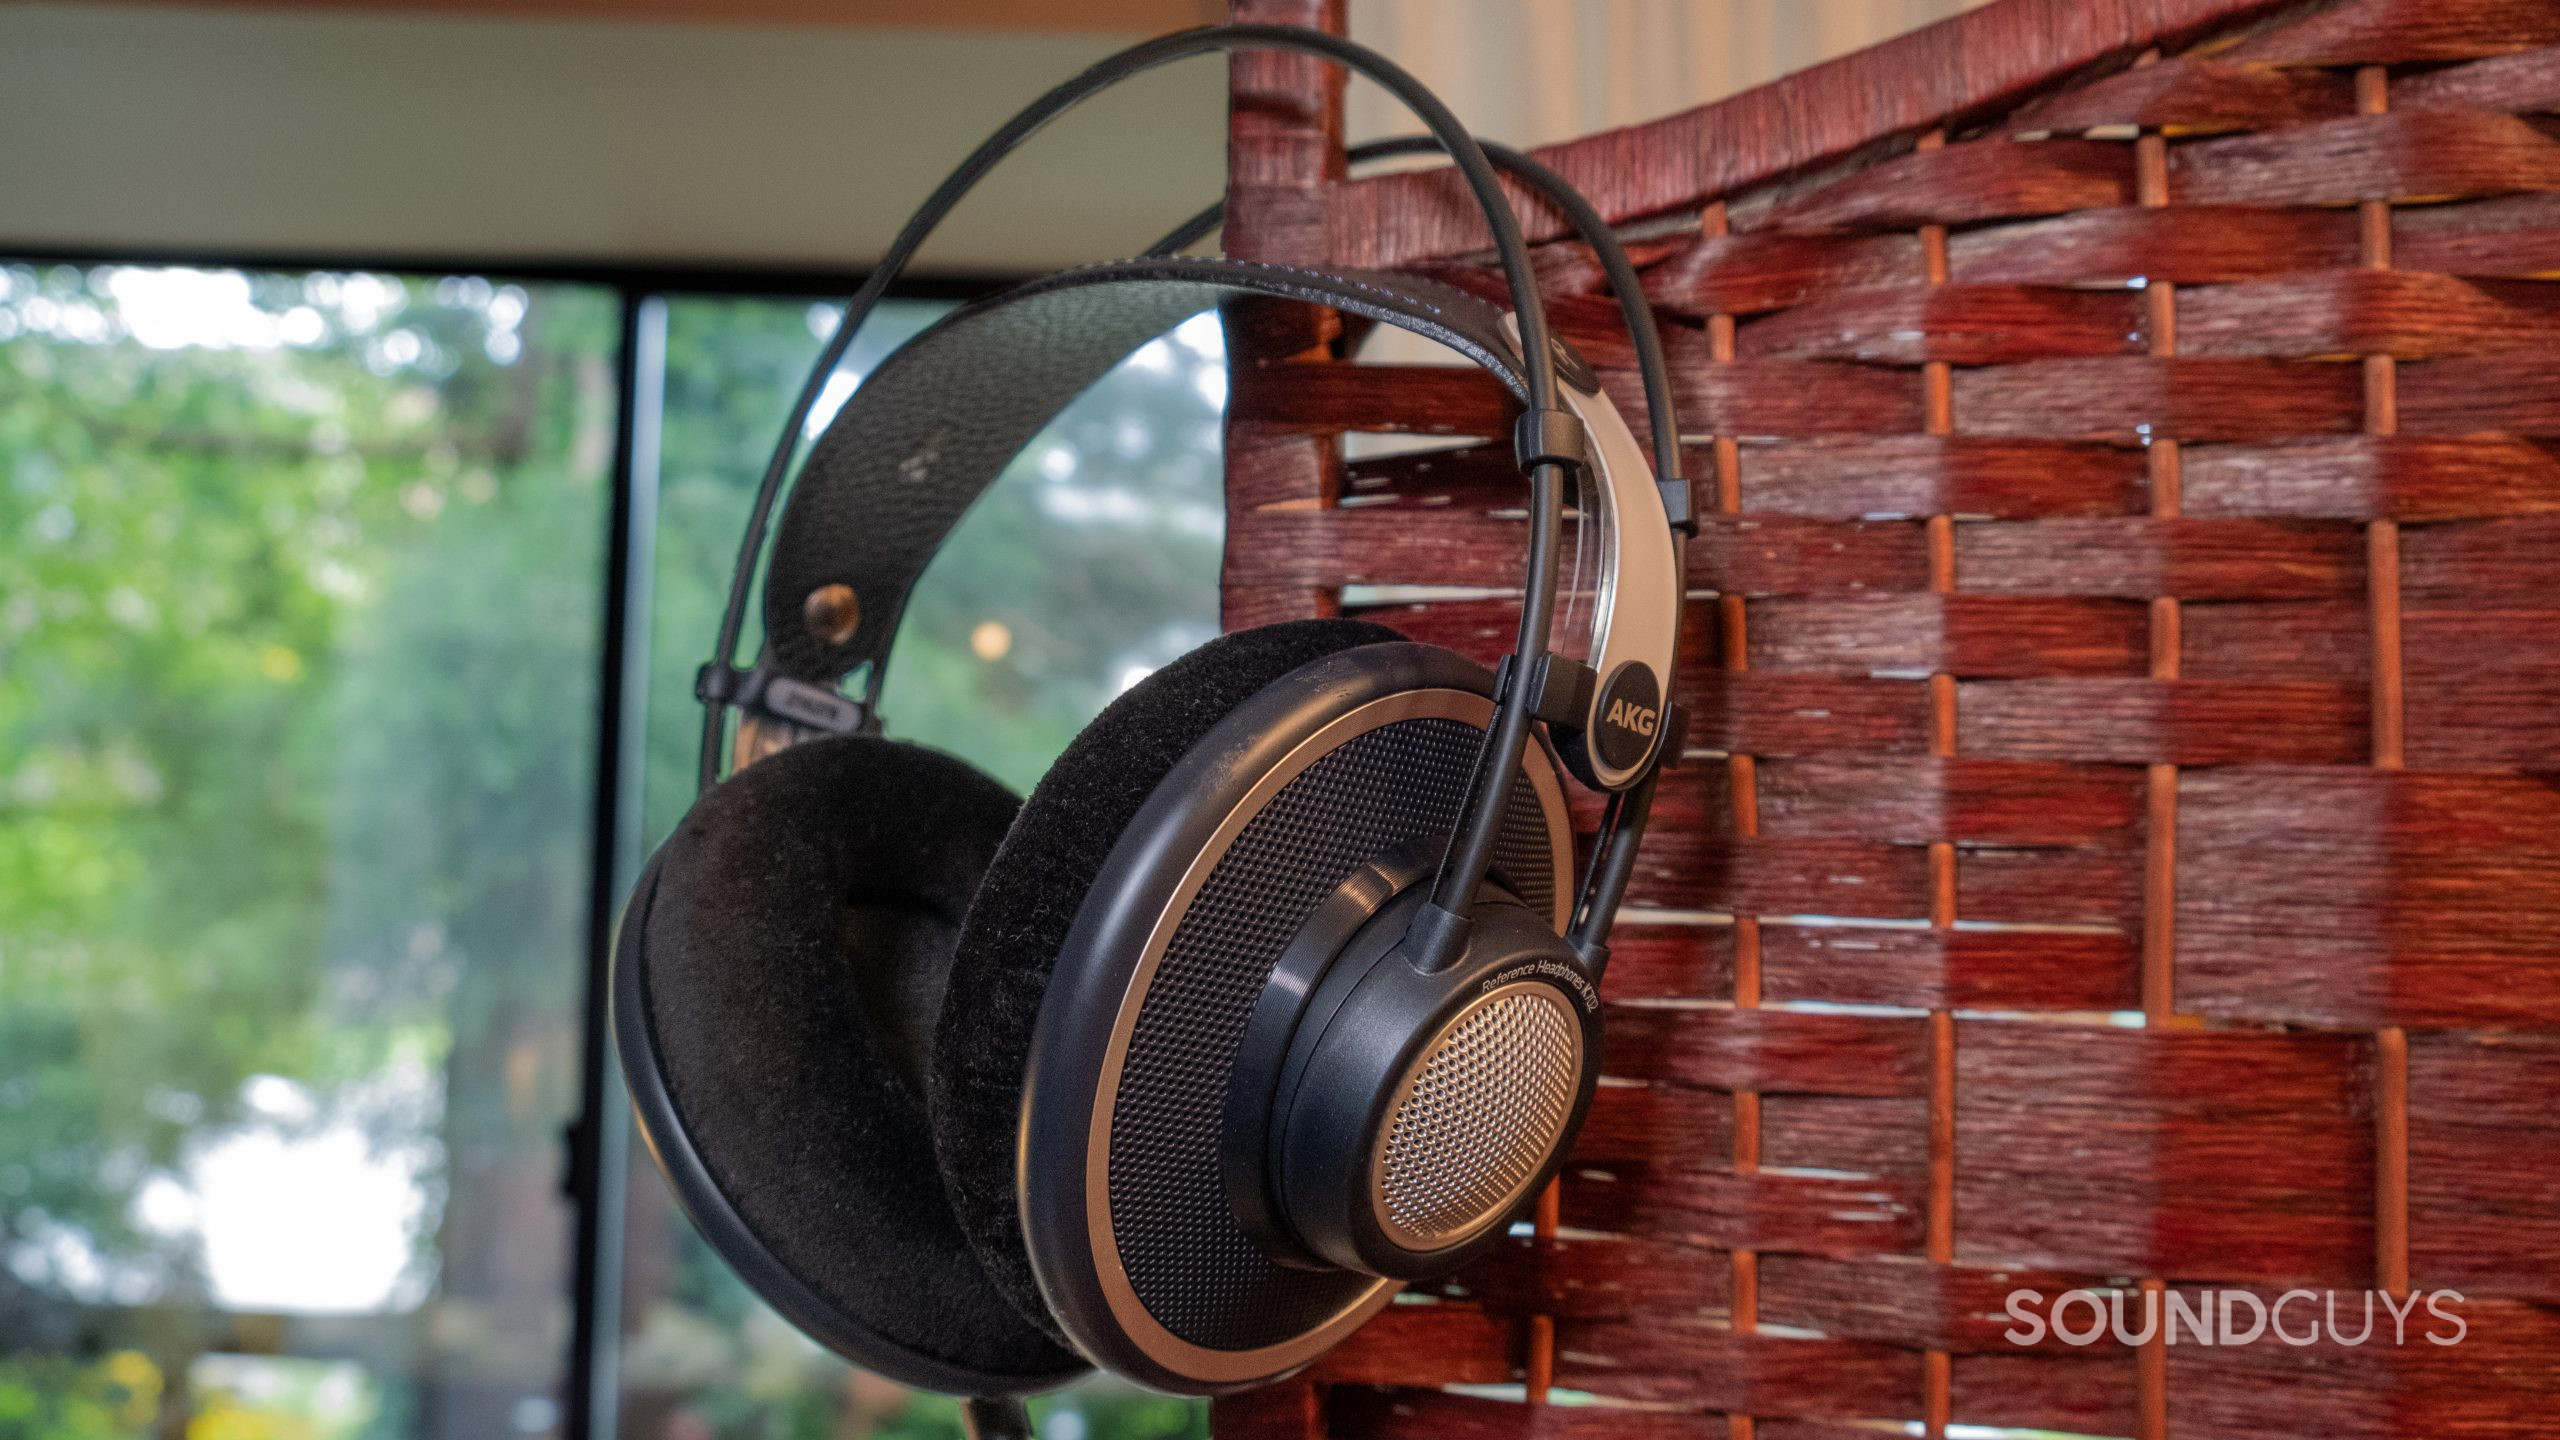 In the center of the image the AKG K702 hangs from a room divider with a window overlooking greenery in the background.